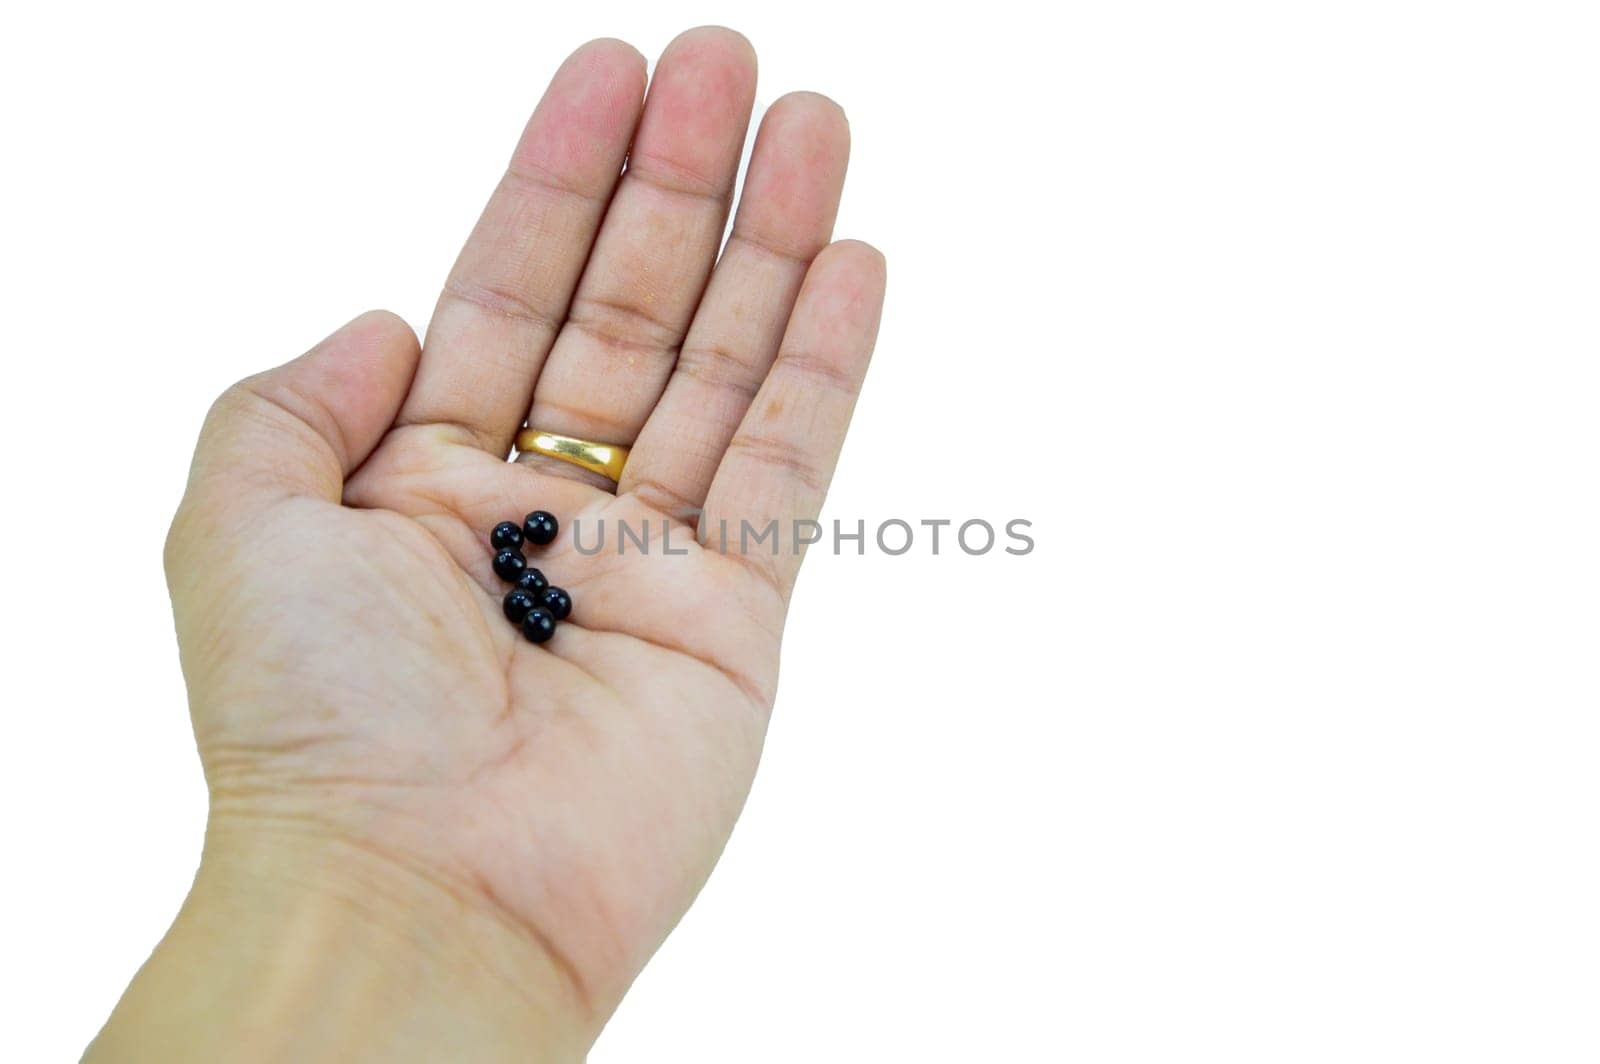 A hand with a pill on it, with clipping path